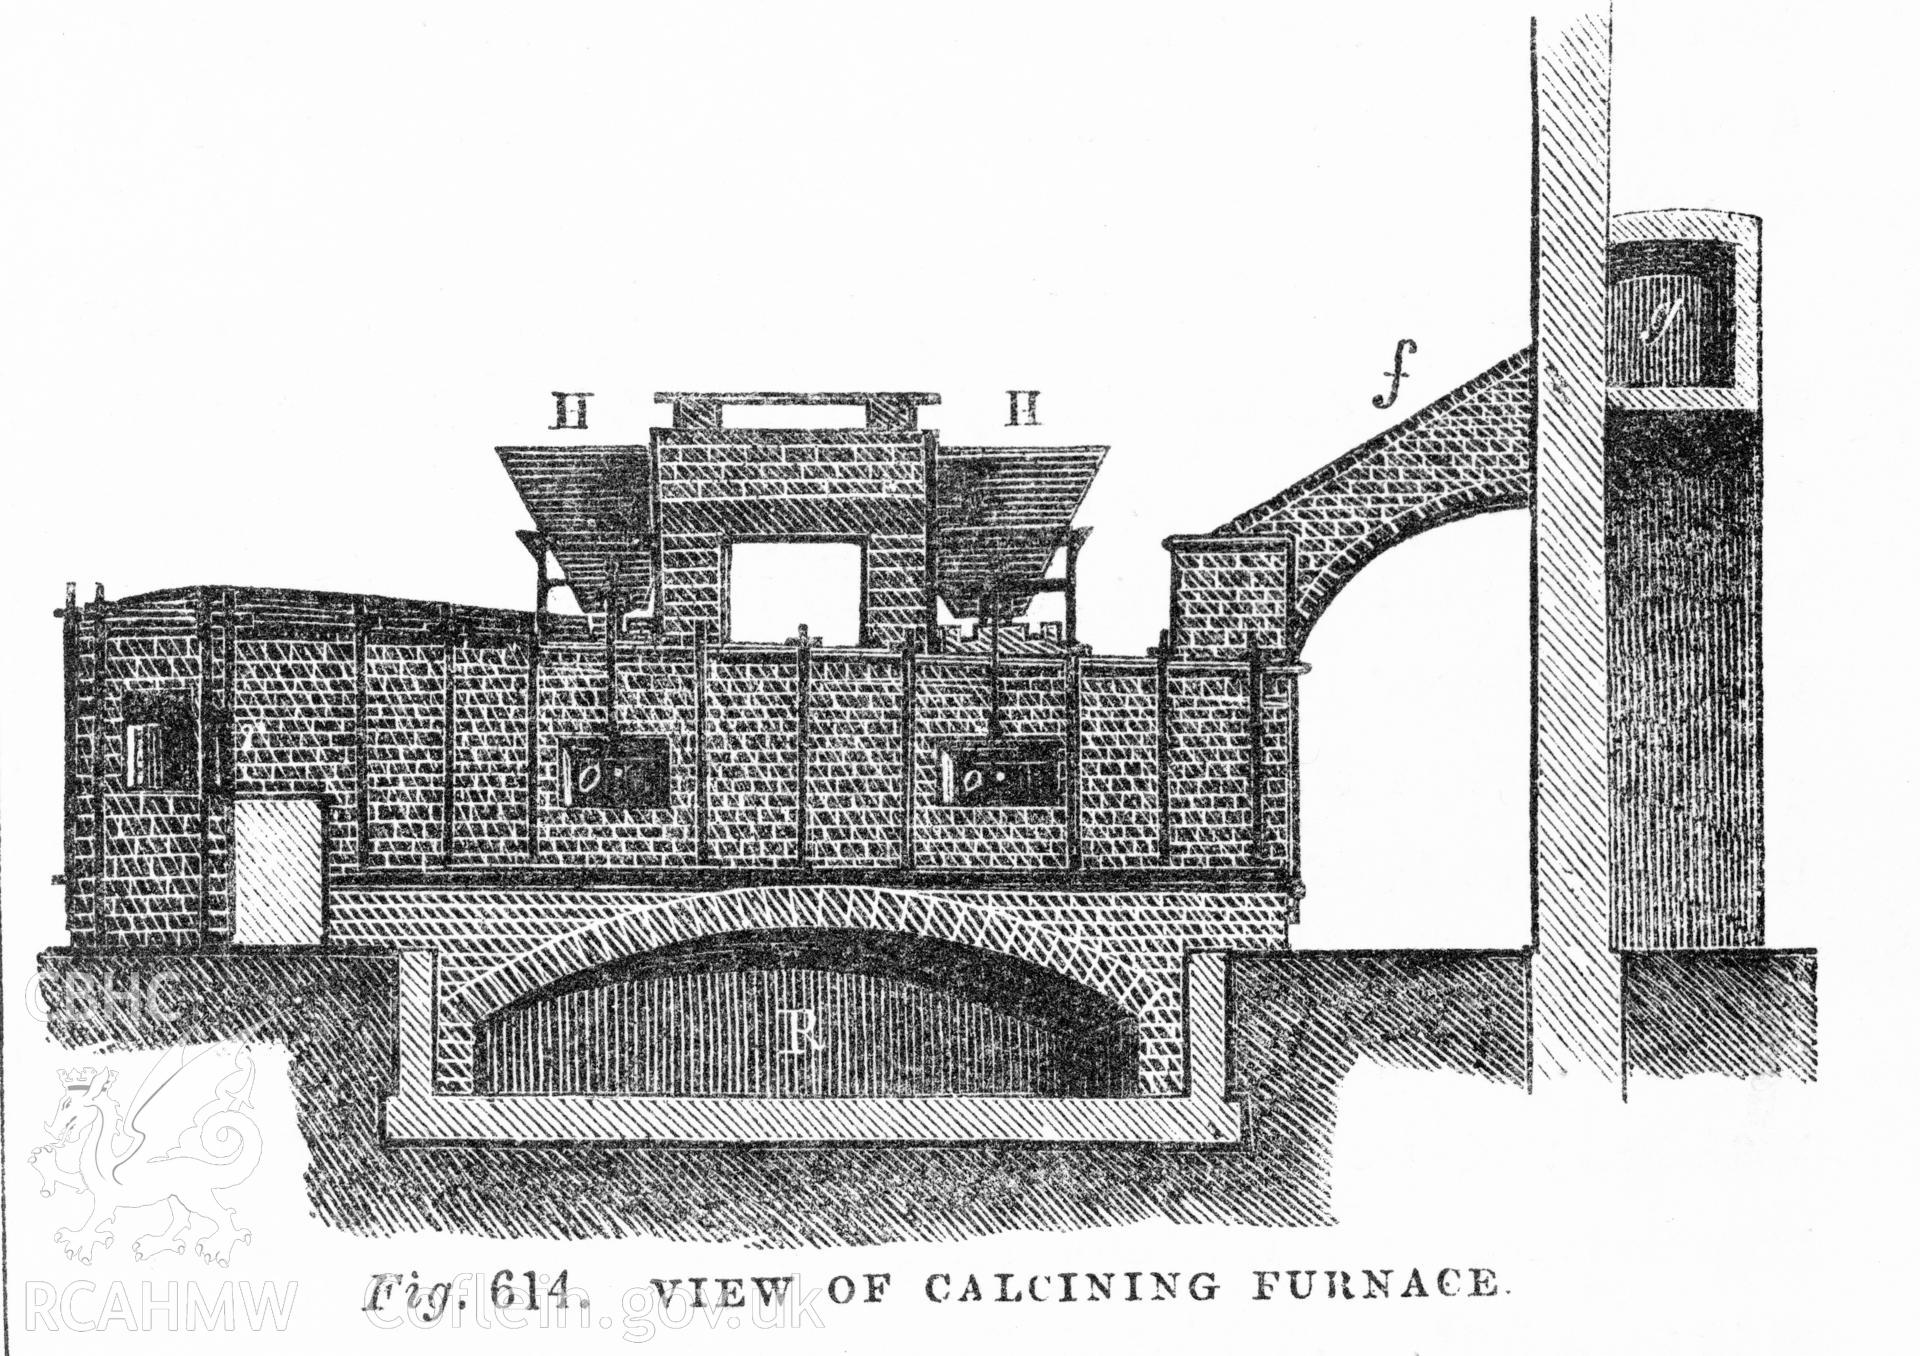 Digitized image of a drawing showing a calcining furnace as published fig 614 from Tomlinson's 'Cyclopedia of Useful Arts, Manufacturing, Mining and Engineering' Vol I, 1854.